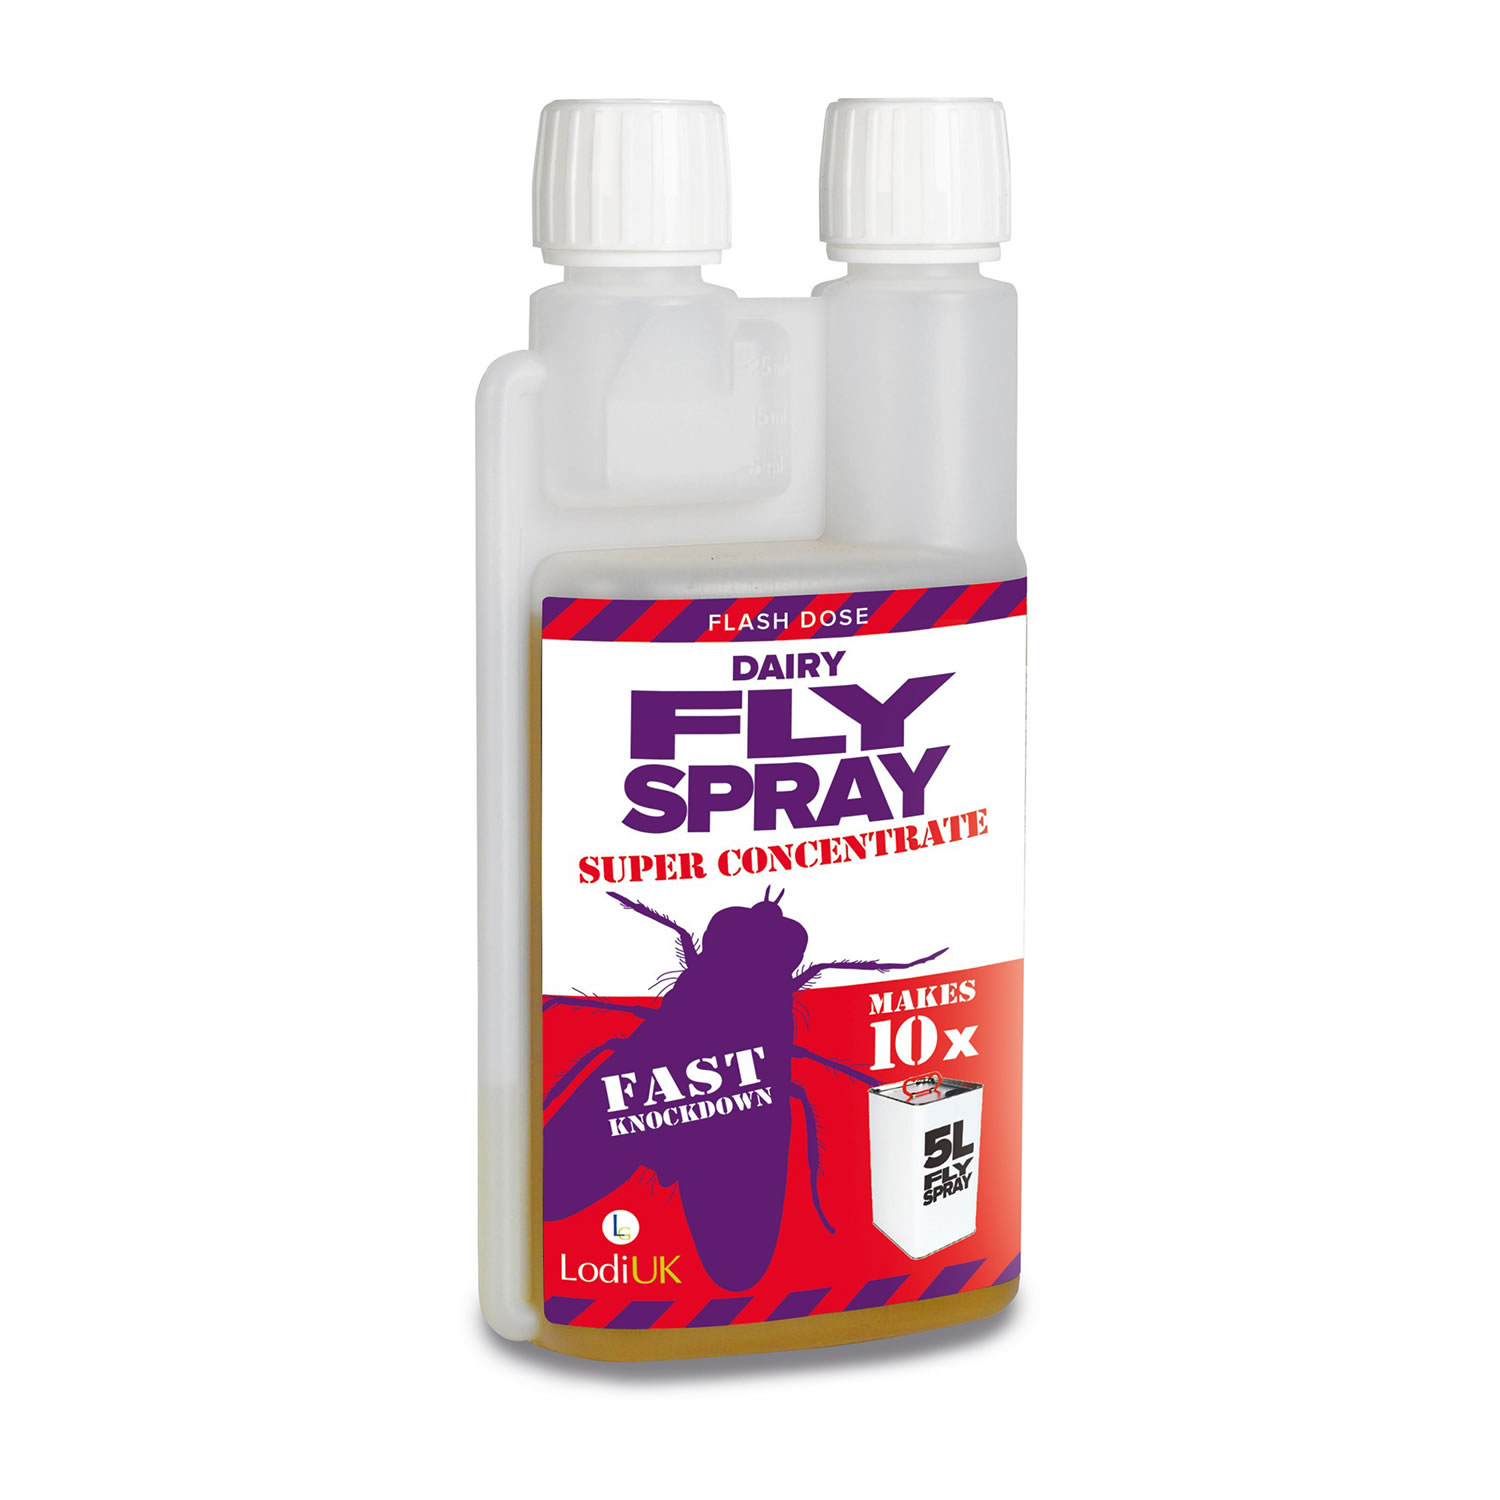 LODI FLASH DOSE DAIRY FLY SPRAY SUPER CONCENTRATE